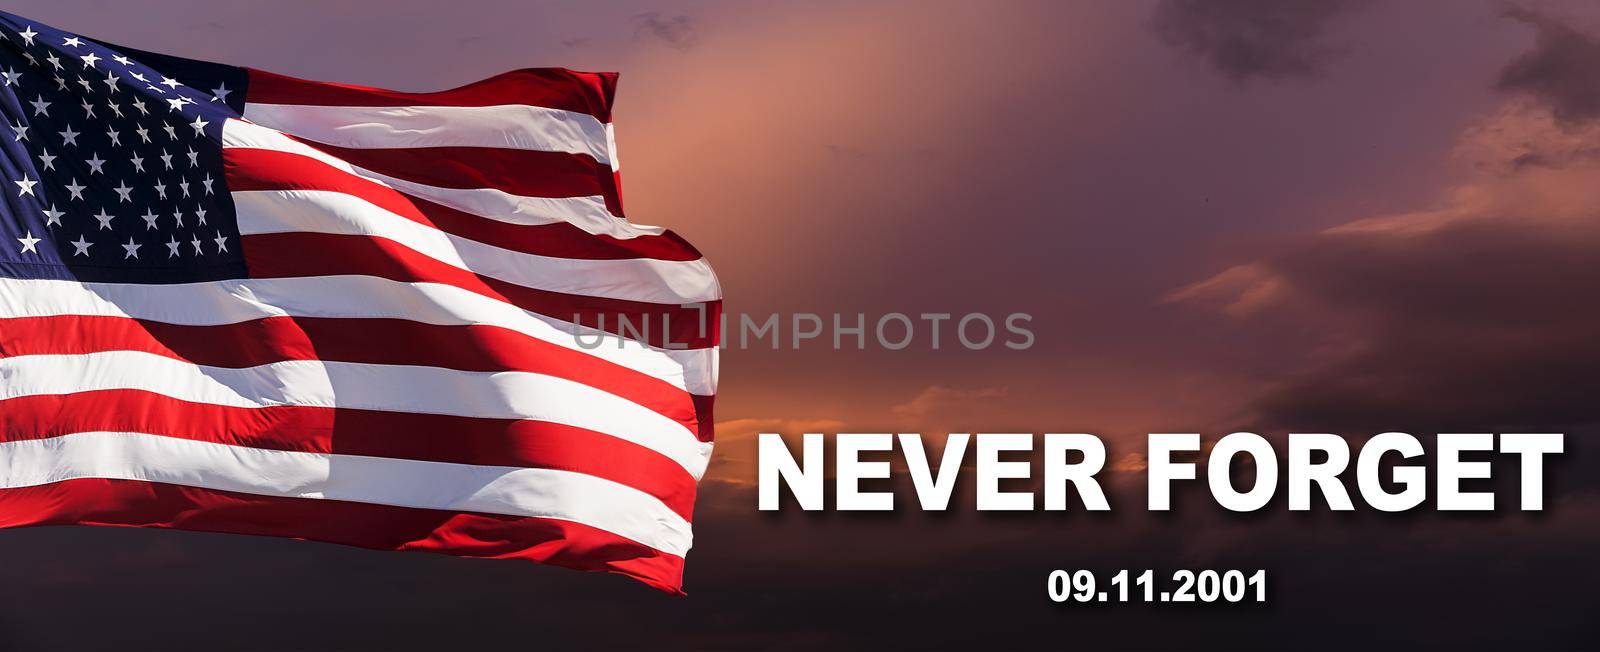 Patriot Day. We will newer forget September 11, 2001. American flag waving against a cloudy sky